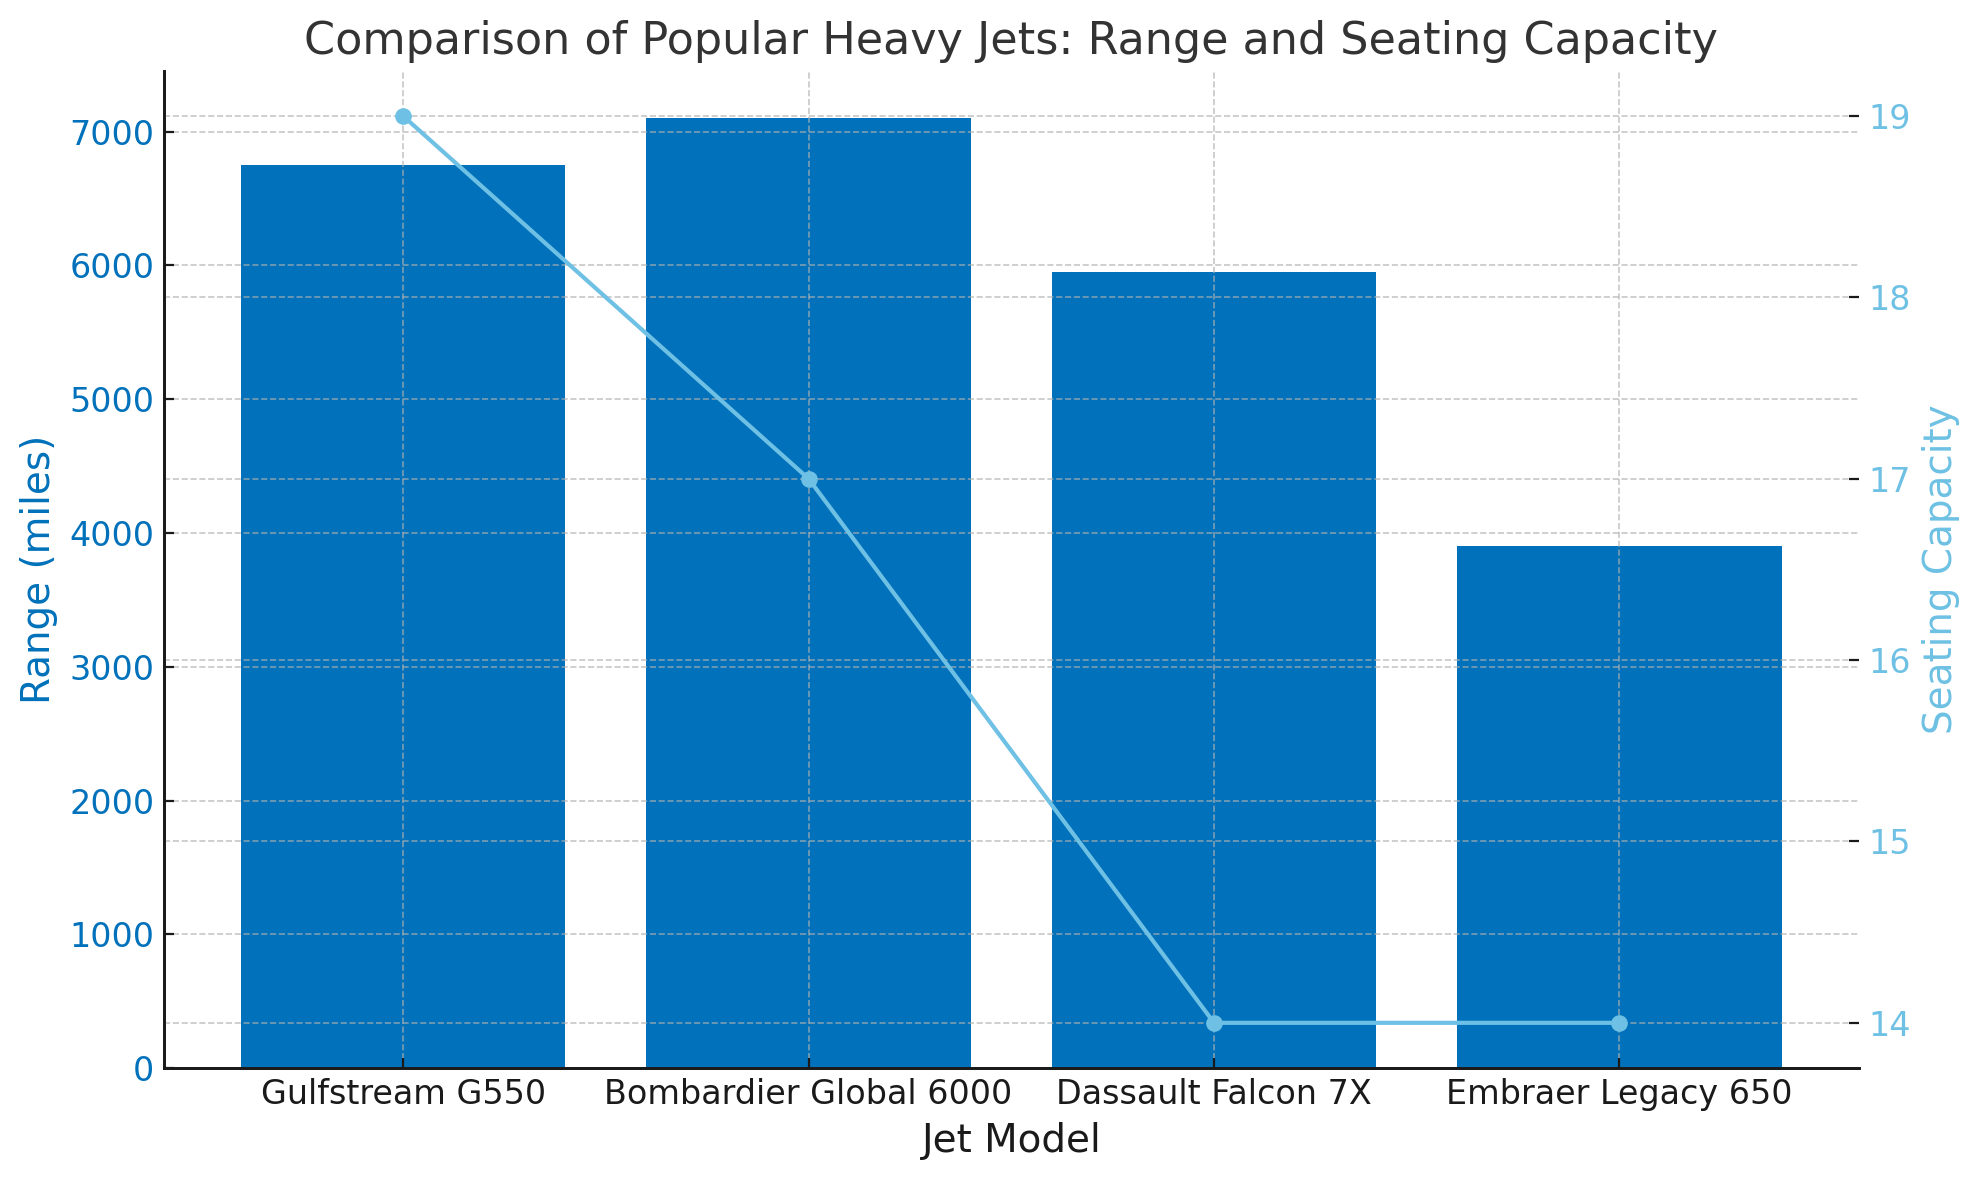 Heavy Jets: Spacious and Luxurious